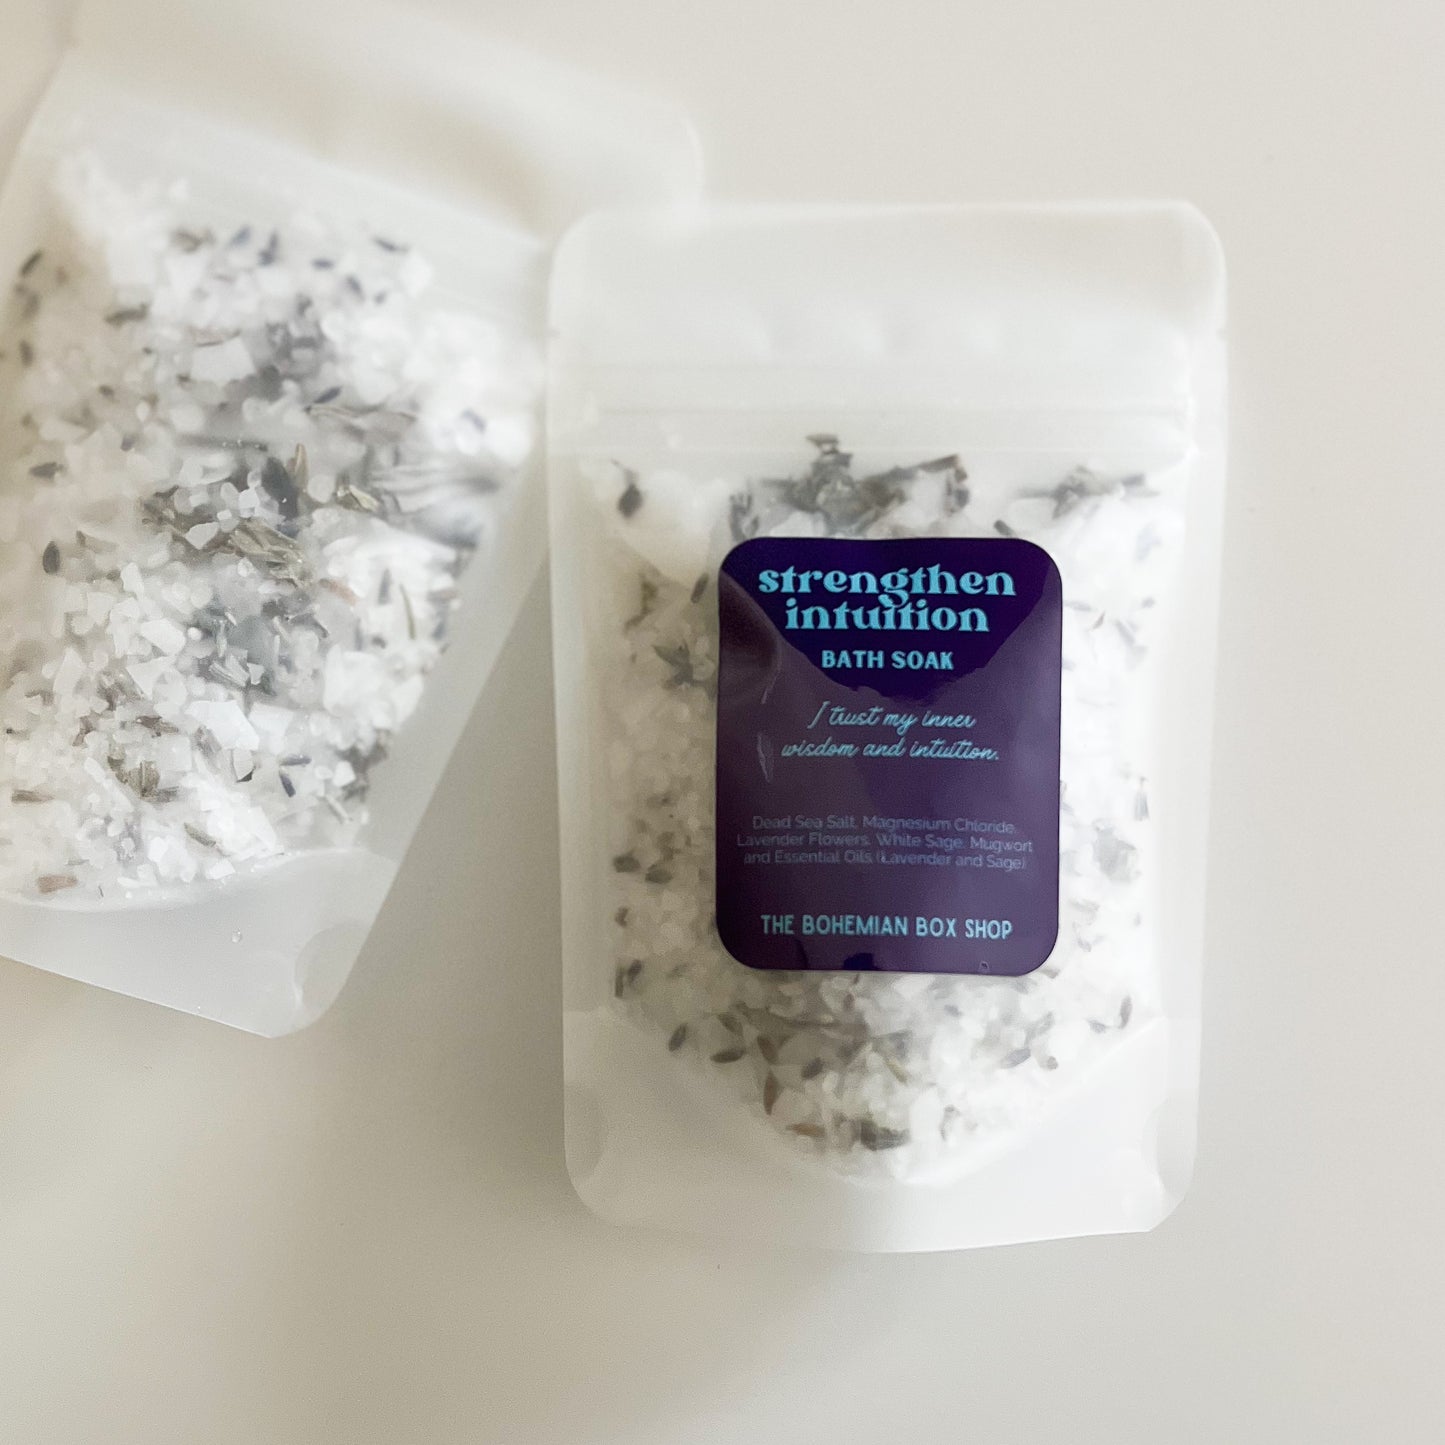 Strengthen intuition bath soak with affirmation, blue and purple label.